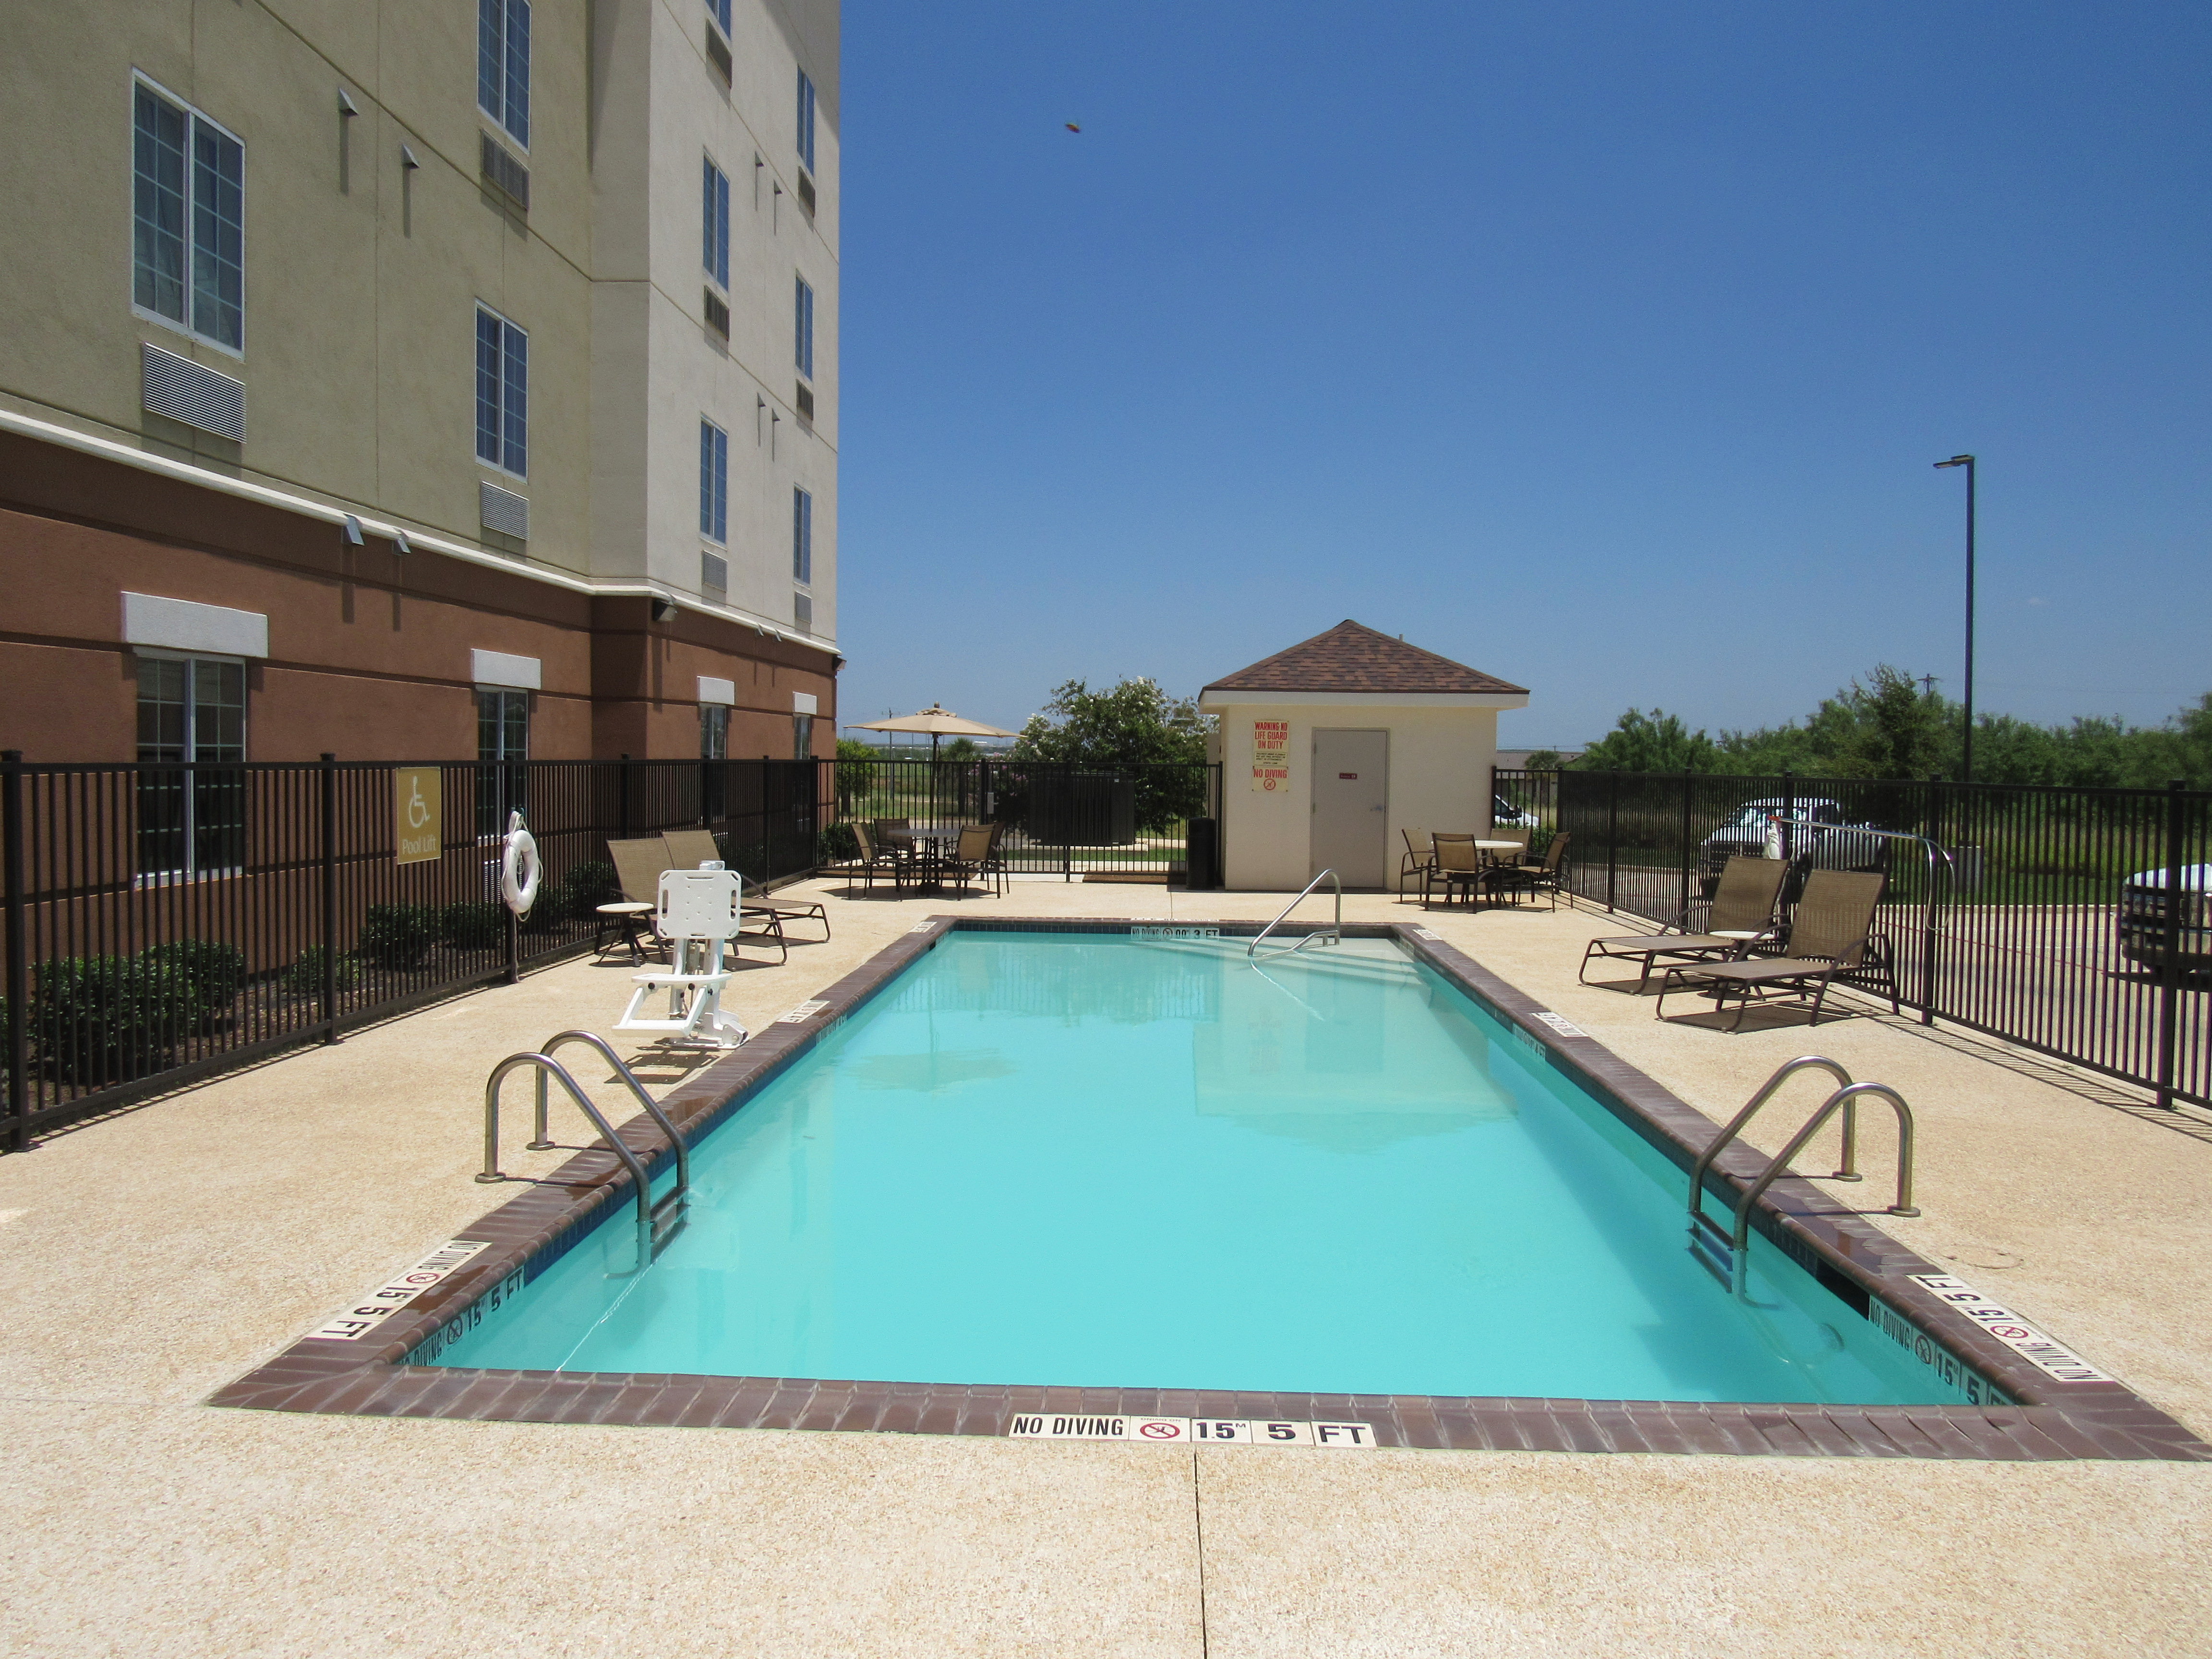 Enjoy the outdoor pool at the Candlewood Suites Cotulla, Texas